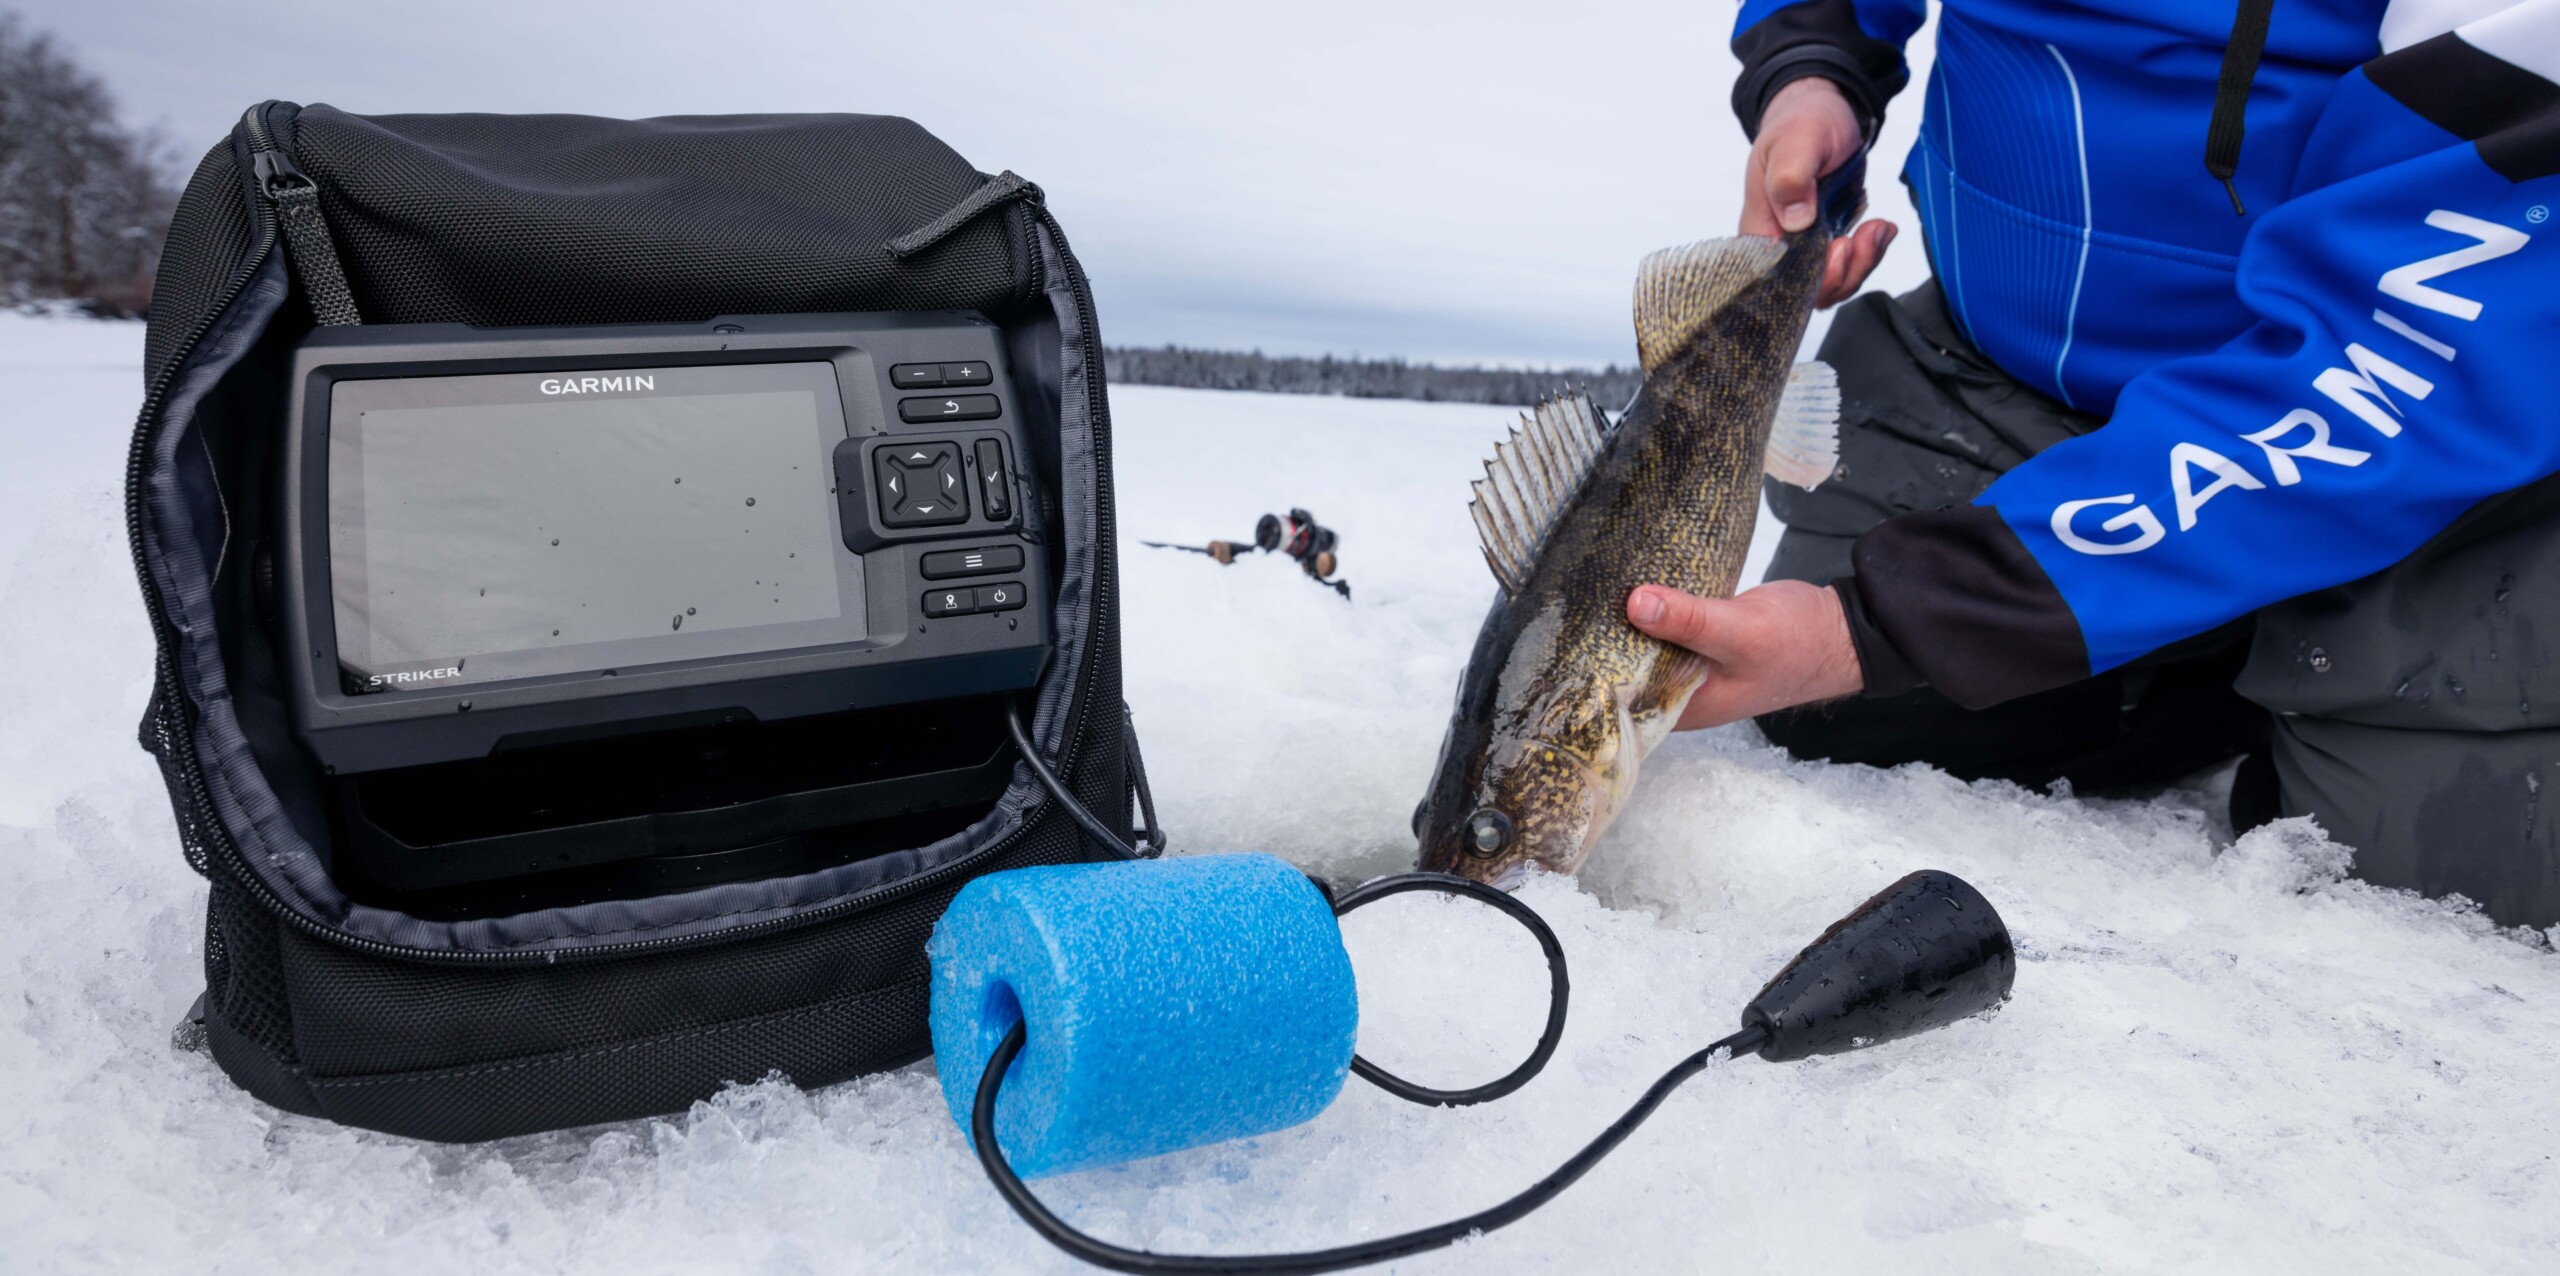 Is the Livescope Plus Ice Fishing Bundle worth it? Probably not 